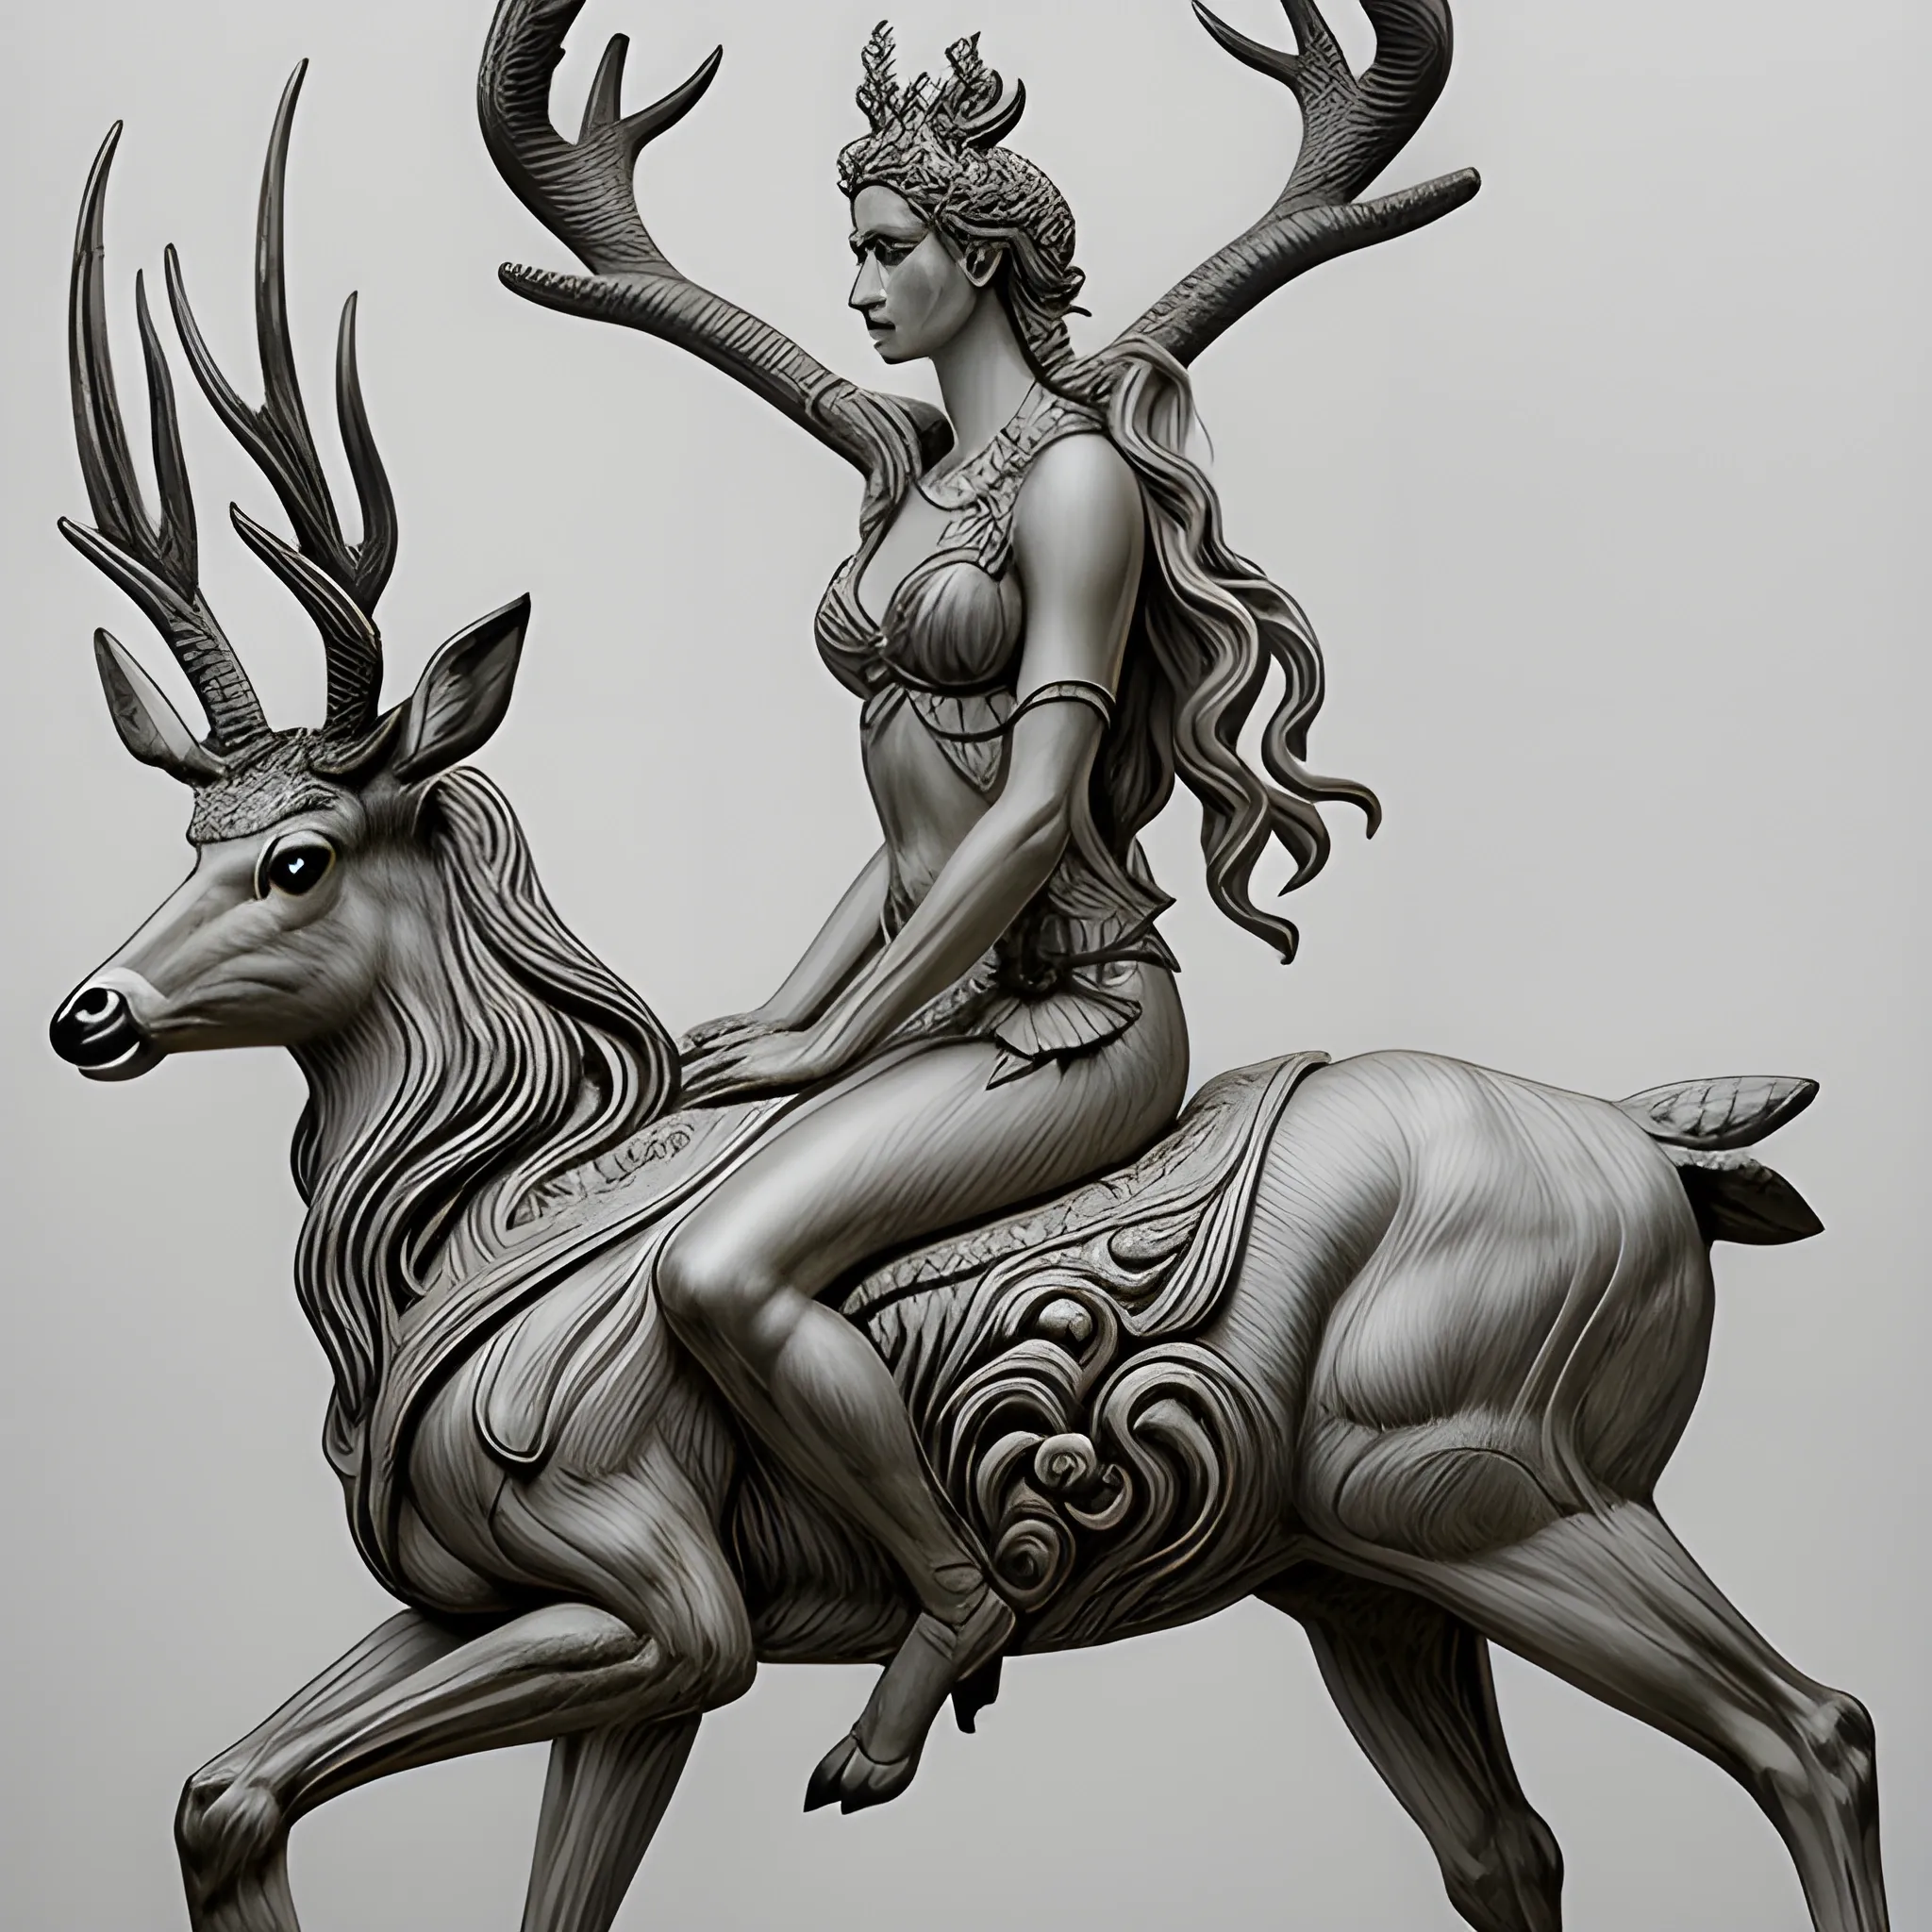 , Pencil Sketch A hyperrealistic and stylized representation of a female goddess of deer and plants, riding a creature that fuses the elegance of the deer with the strength of the horse, created by a prodigious contemporary sculptor of the 21st century